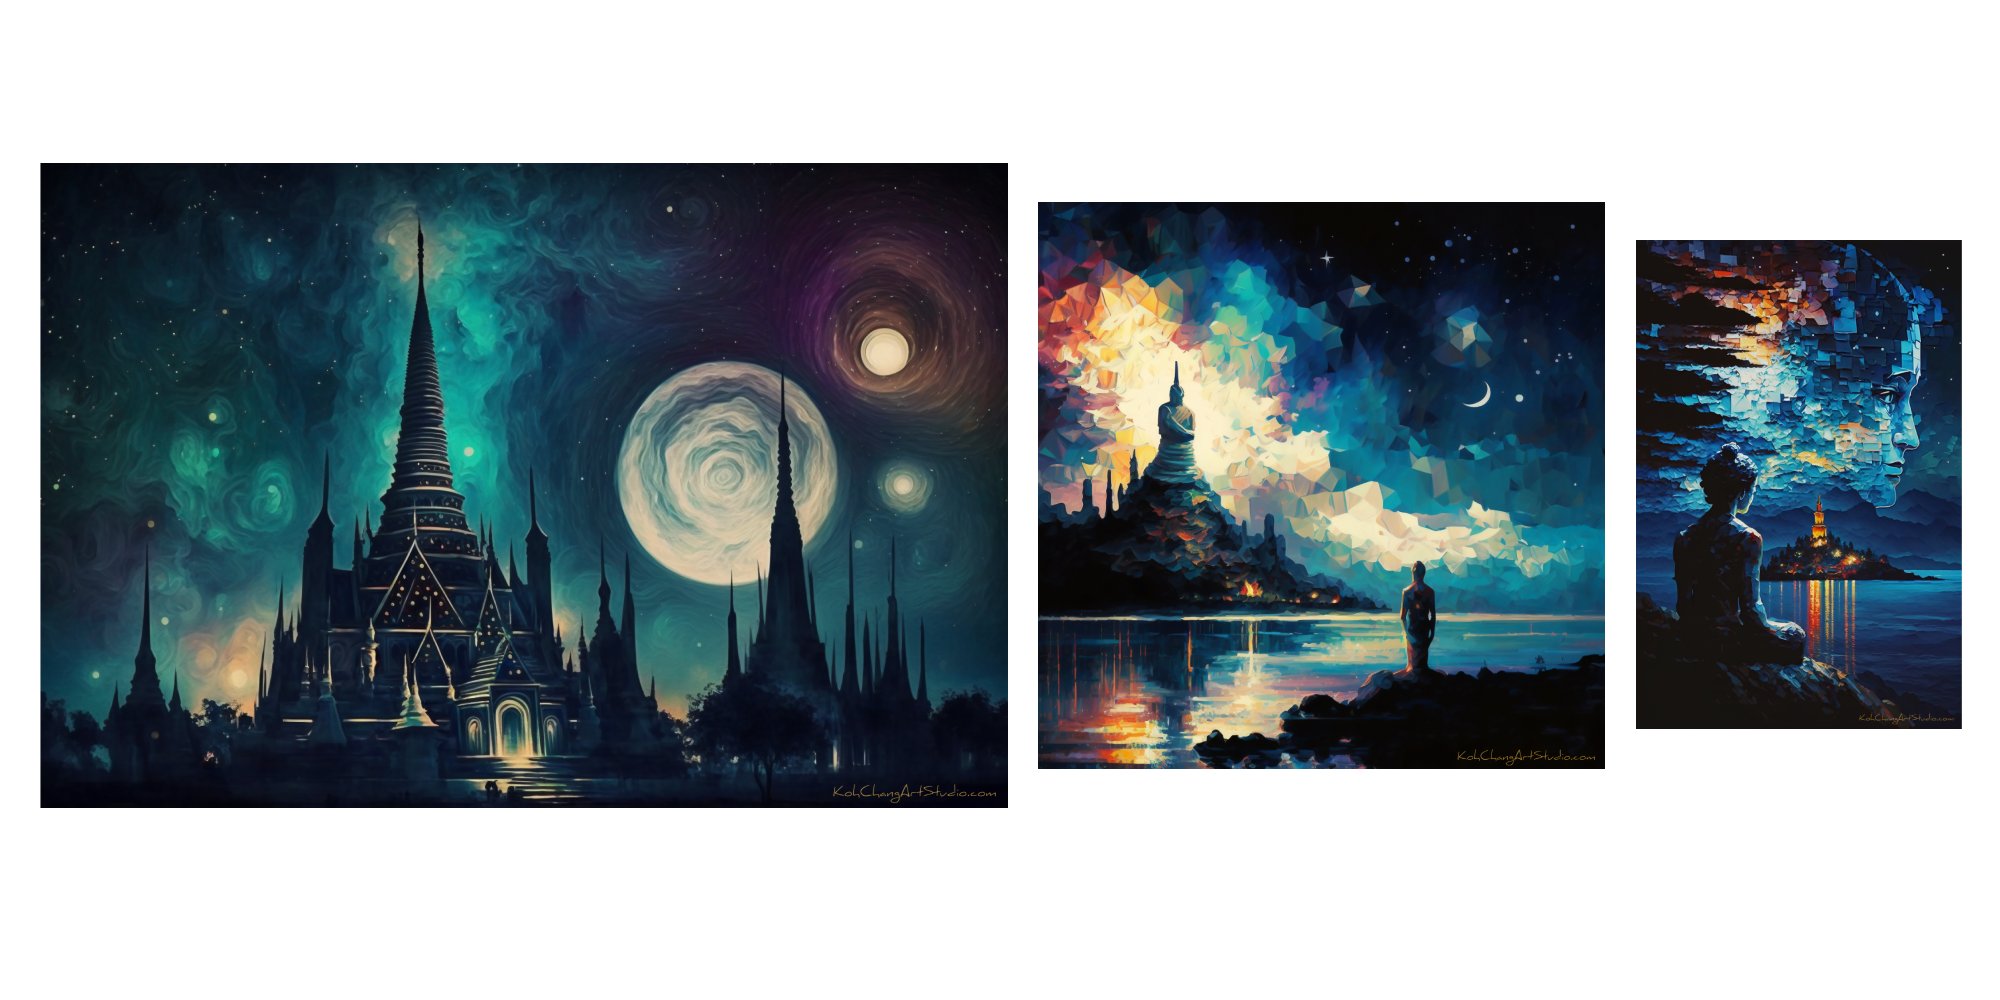 NOBLE NIGHT Design - Sacred shrines, valor, devotion, and the watchful stars.